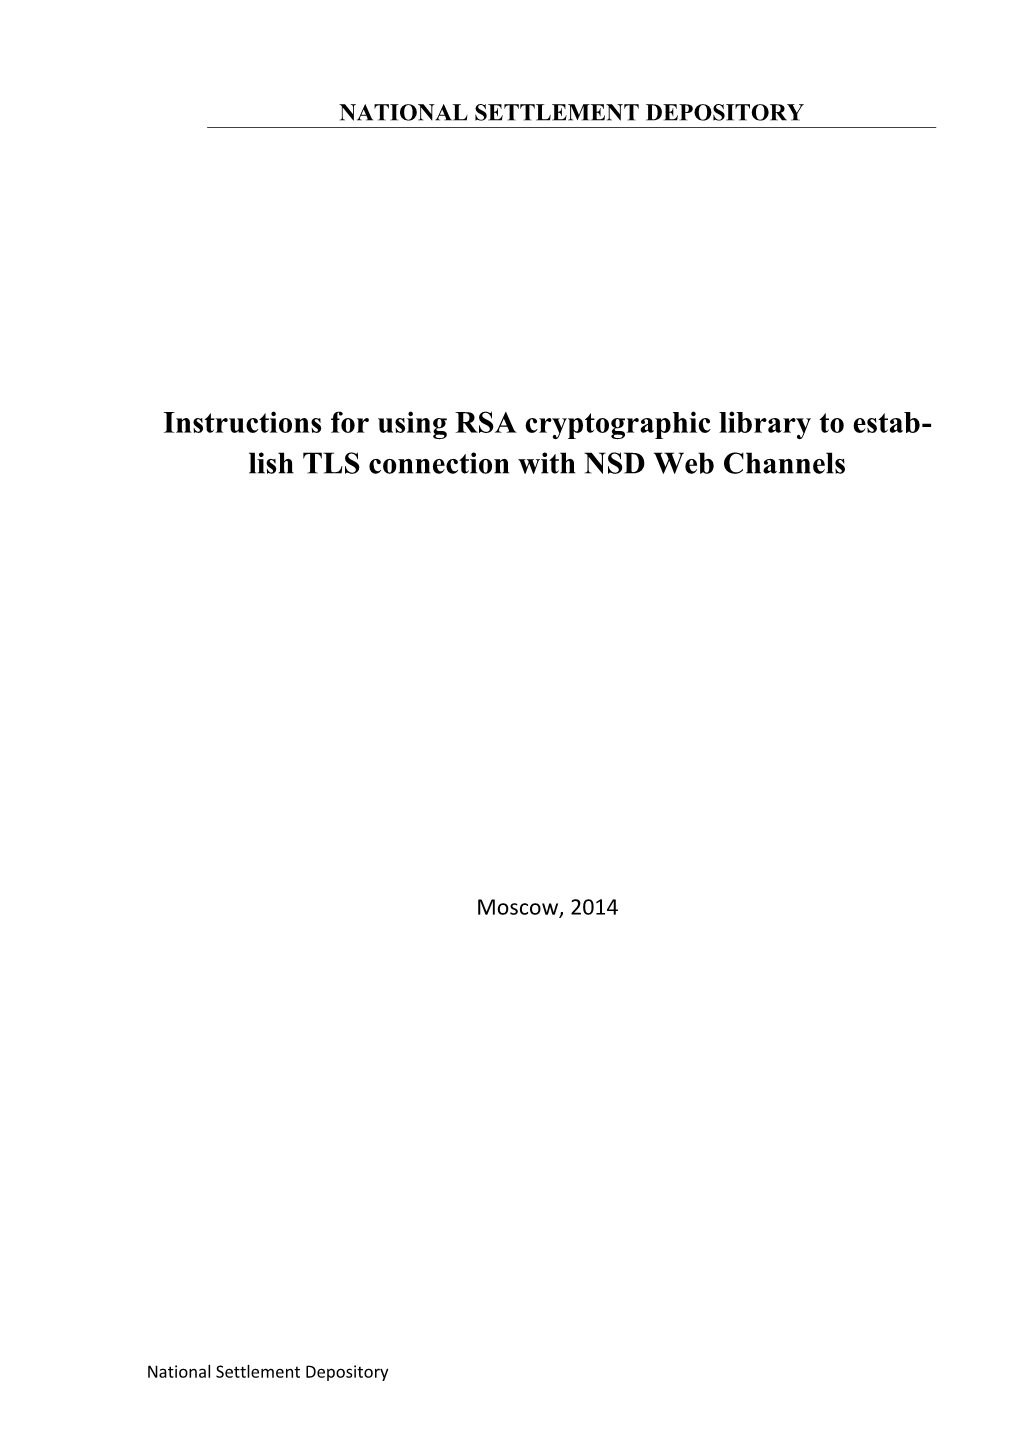 Instructions for Using RSA Cryptographic Library to Establish TLS Connection with NSD Web